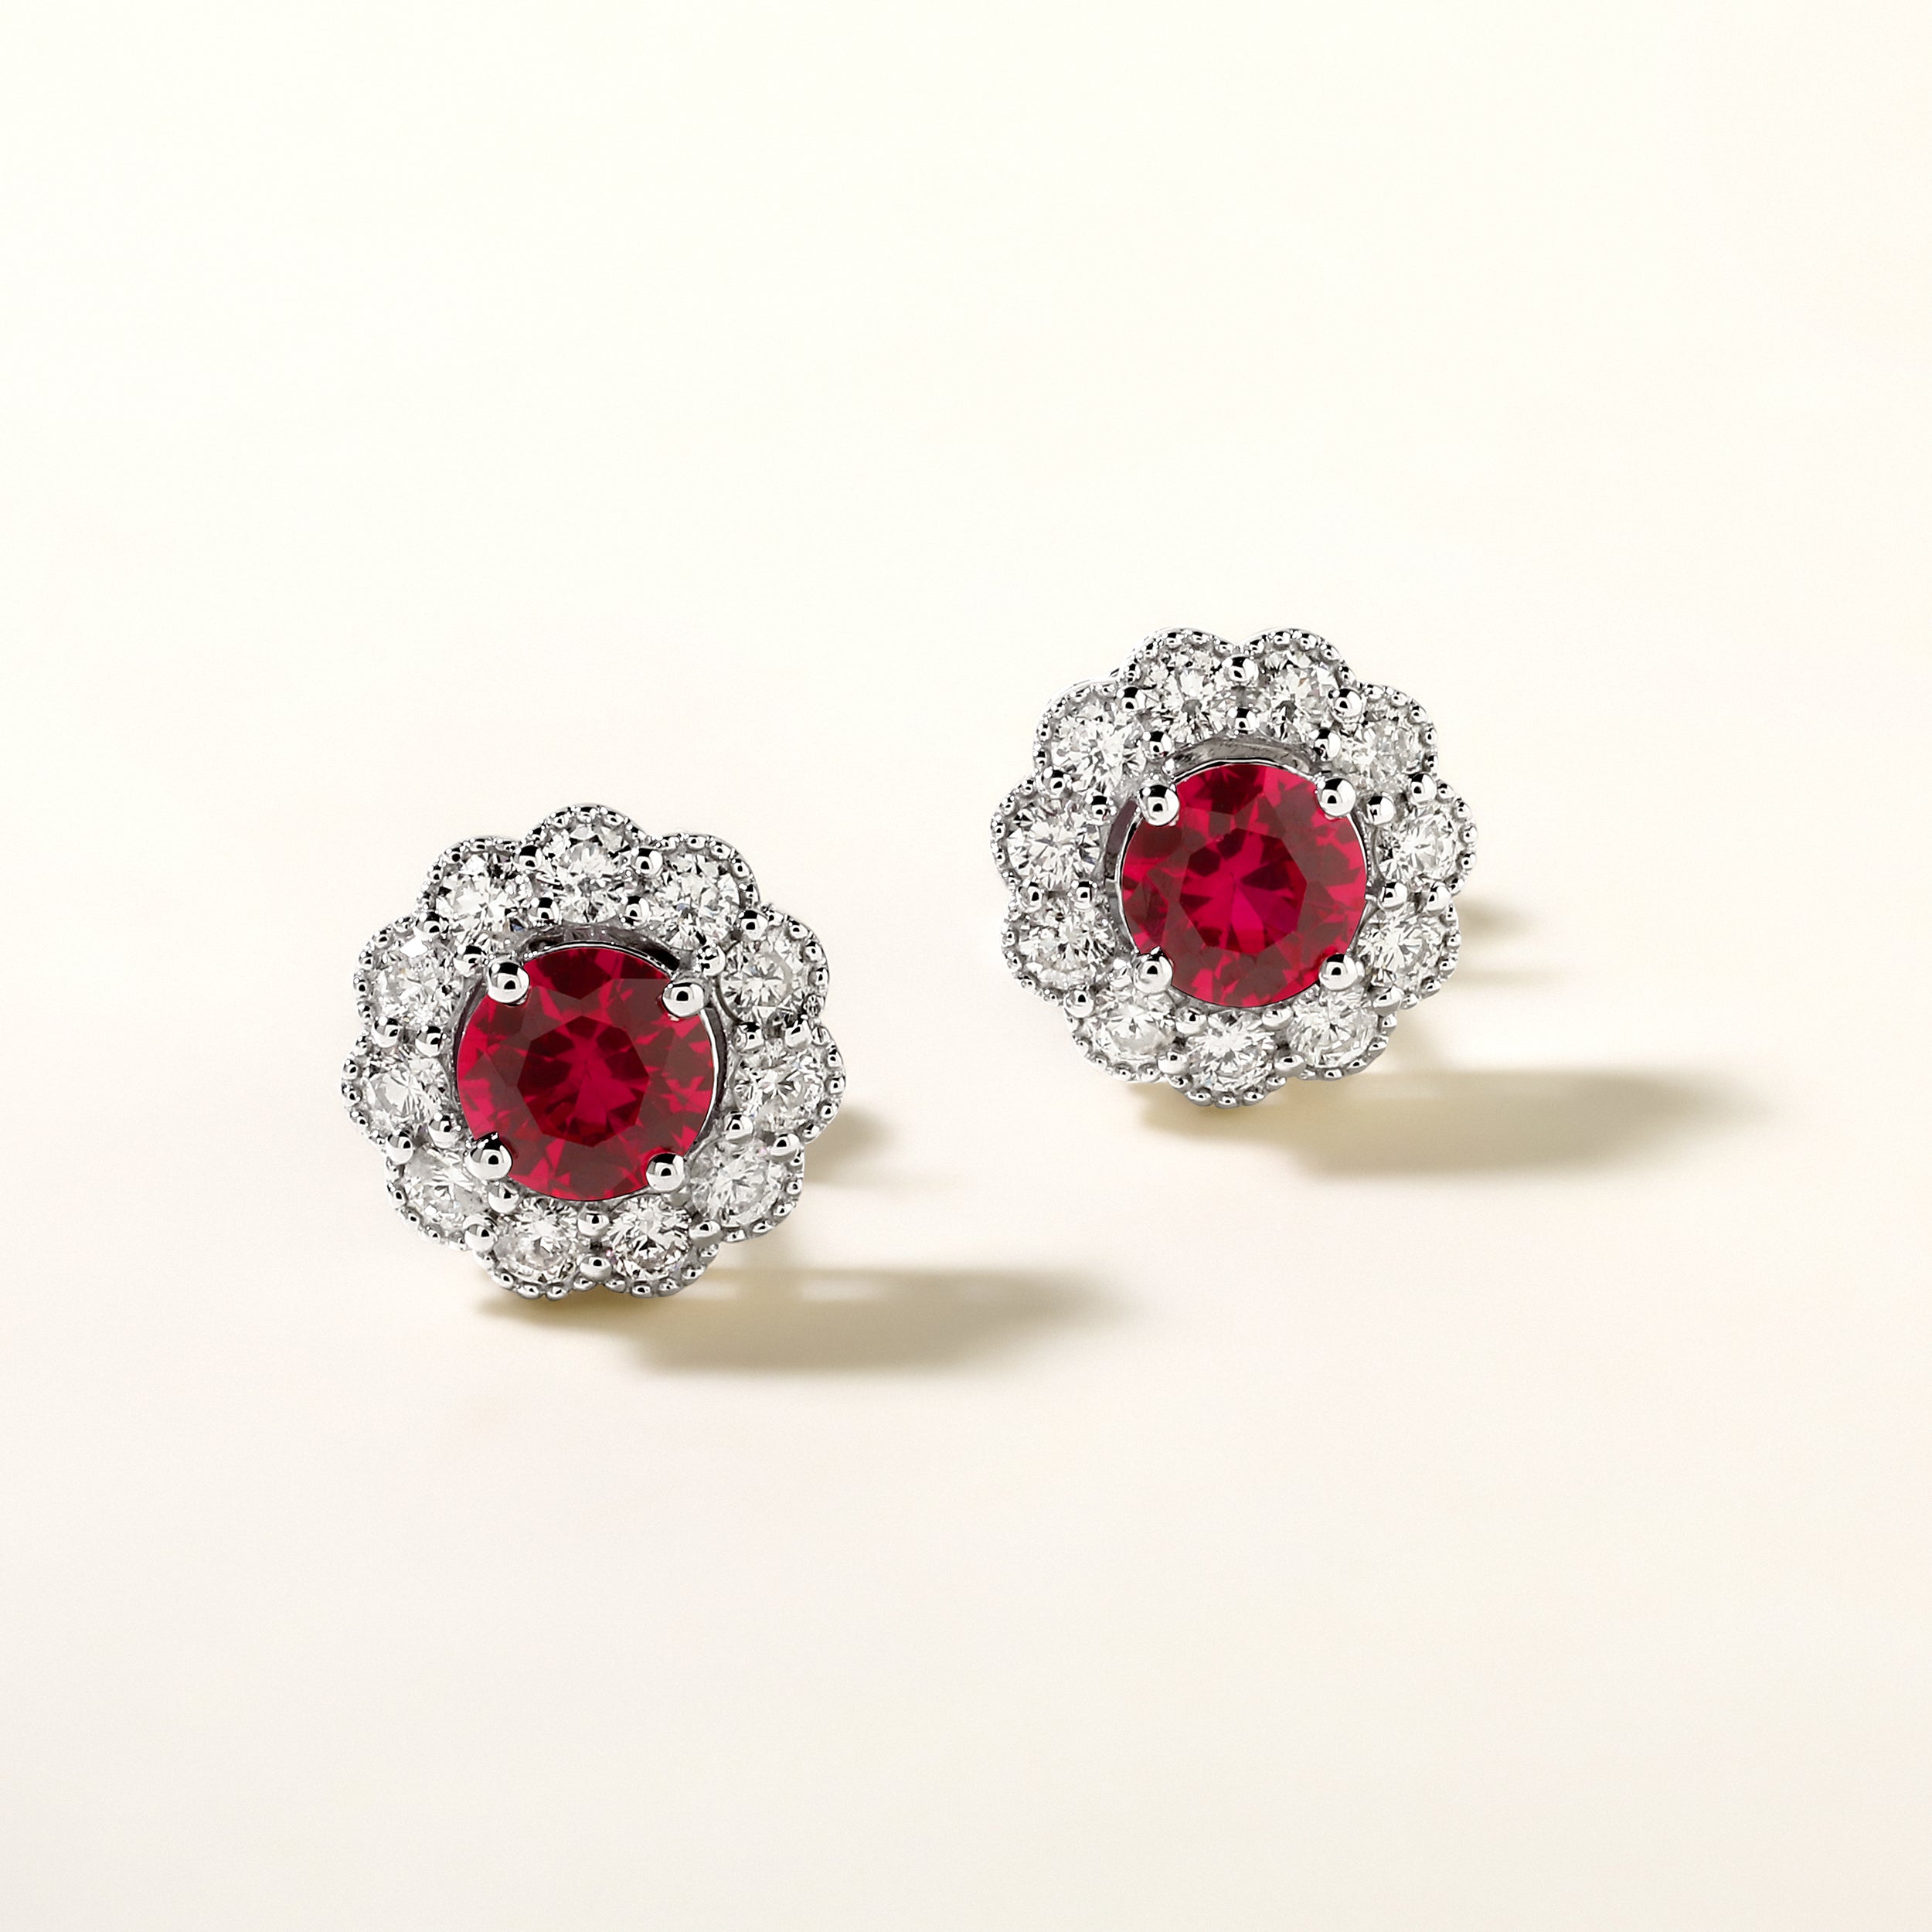 Certified 14K Gold 1.8ct Natural Diamond w/ Simulated Ruby Round Flower Stud Earrings